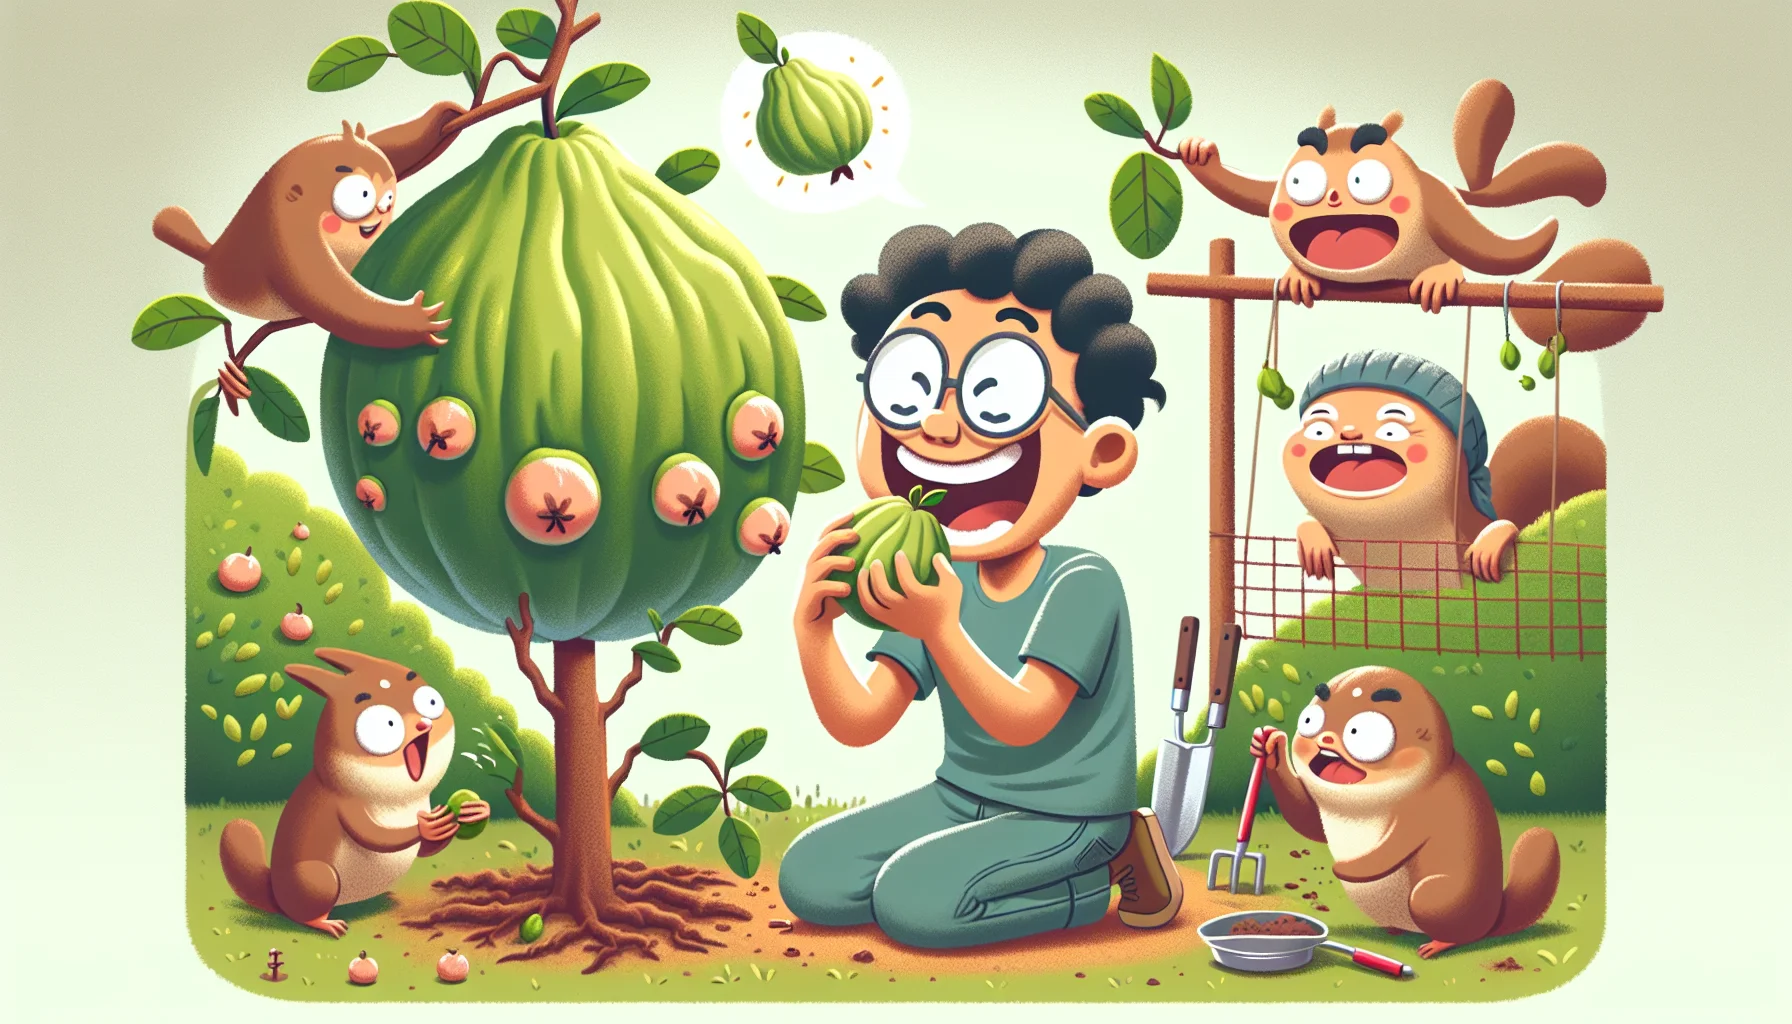 Generate an image that tells a comical story of a person enjoying the process of gardening and discovering how to eat a Mexican guava. In the scenario, an individual of Asian descent is nurturing a thriving guava plant. With wide-eyed surprise and a mirthful grin, they are sampling a freshly picked guava. Bemused birds and squirrels watch from nearby trees, some mimicking the gardener's actions in a playful manner. The image ought to emanate warmth, endearment and humor, inspiring people to experience the joys of gardening and exploring new fruits like the Mexican guava.